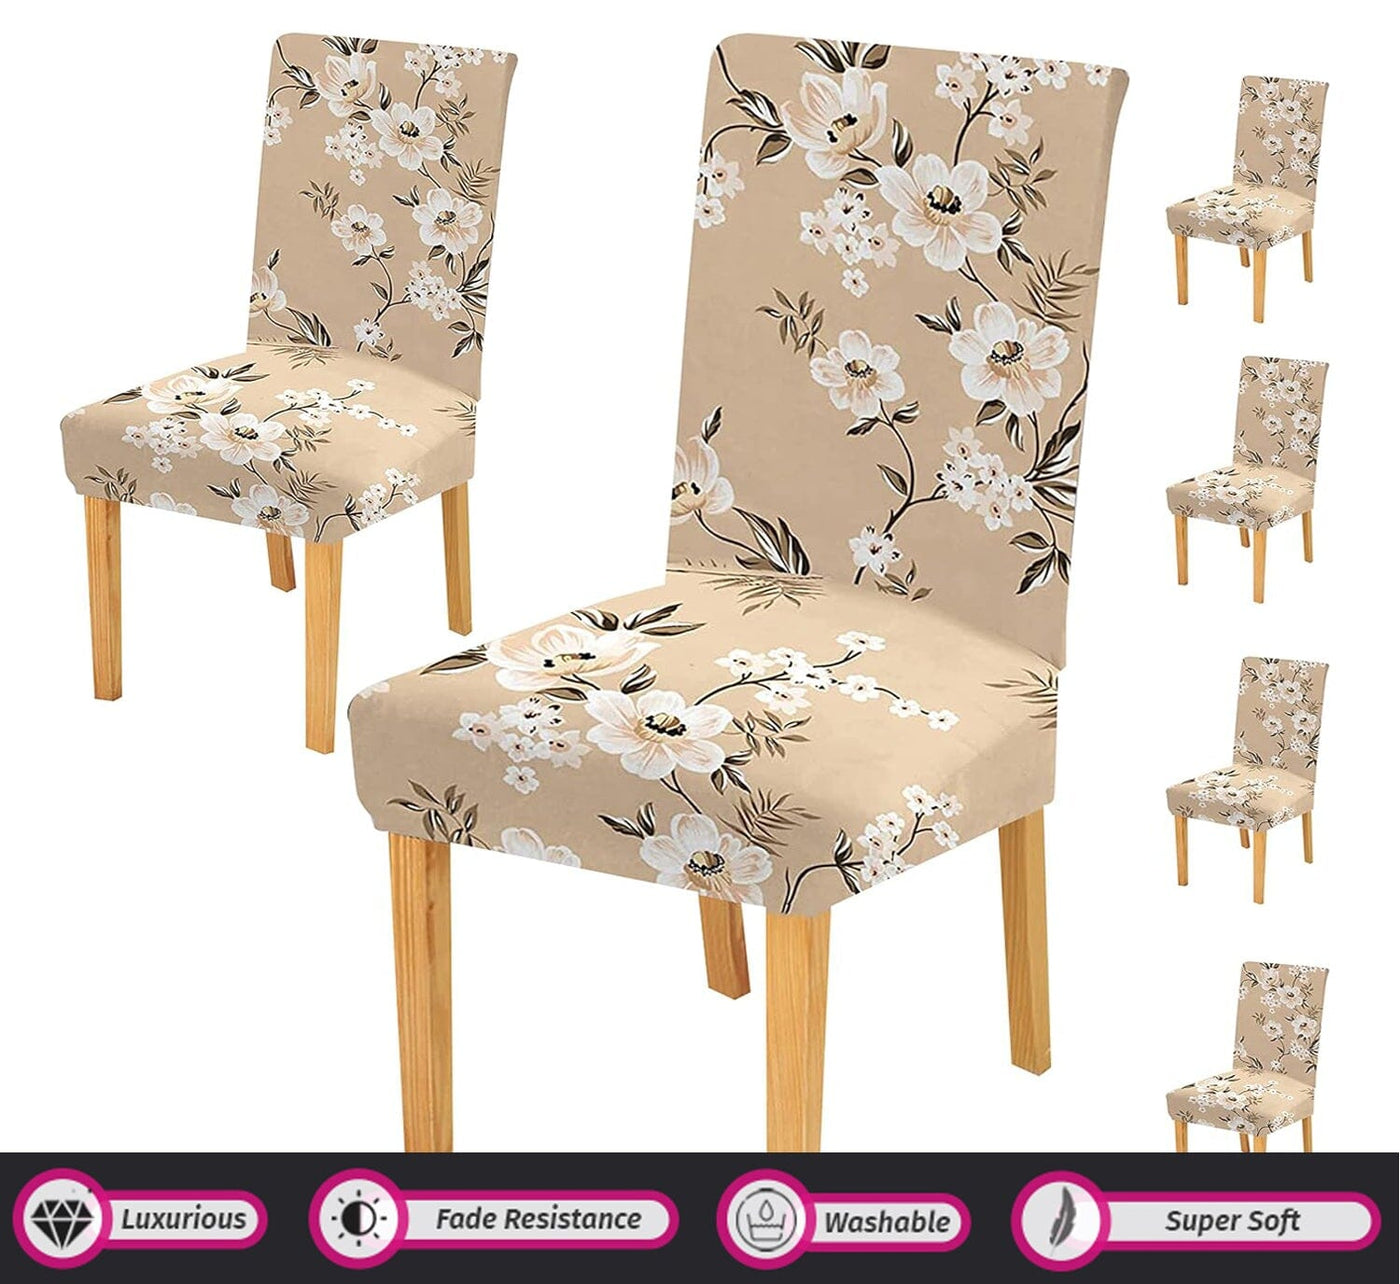 Premium Chair Cover - Stretchable & Elastic Fitted Great Happy IN Cream Flower 2 PCS - ₹799 